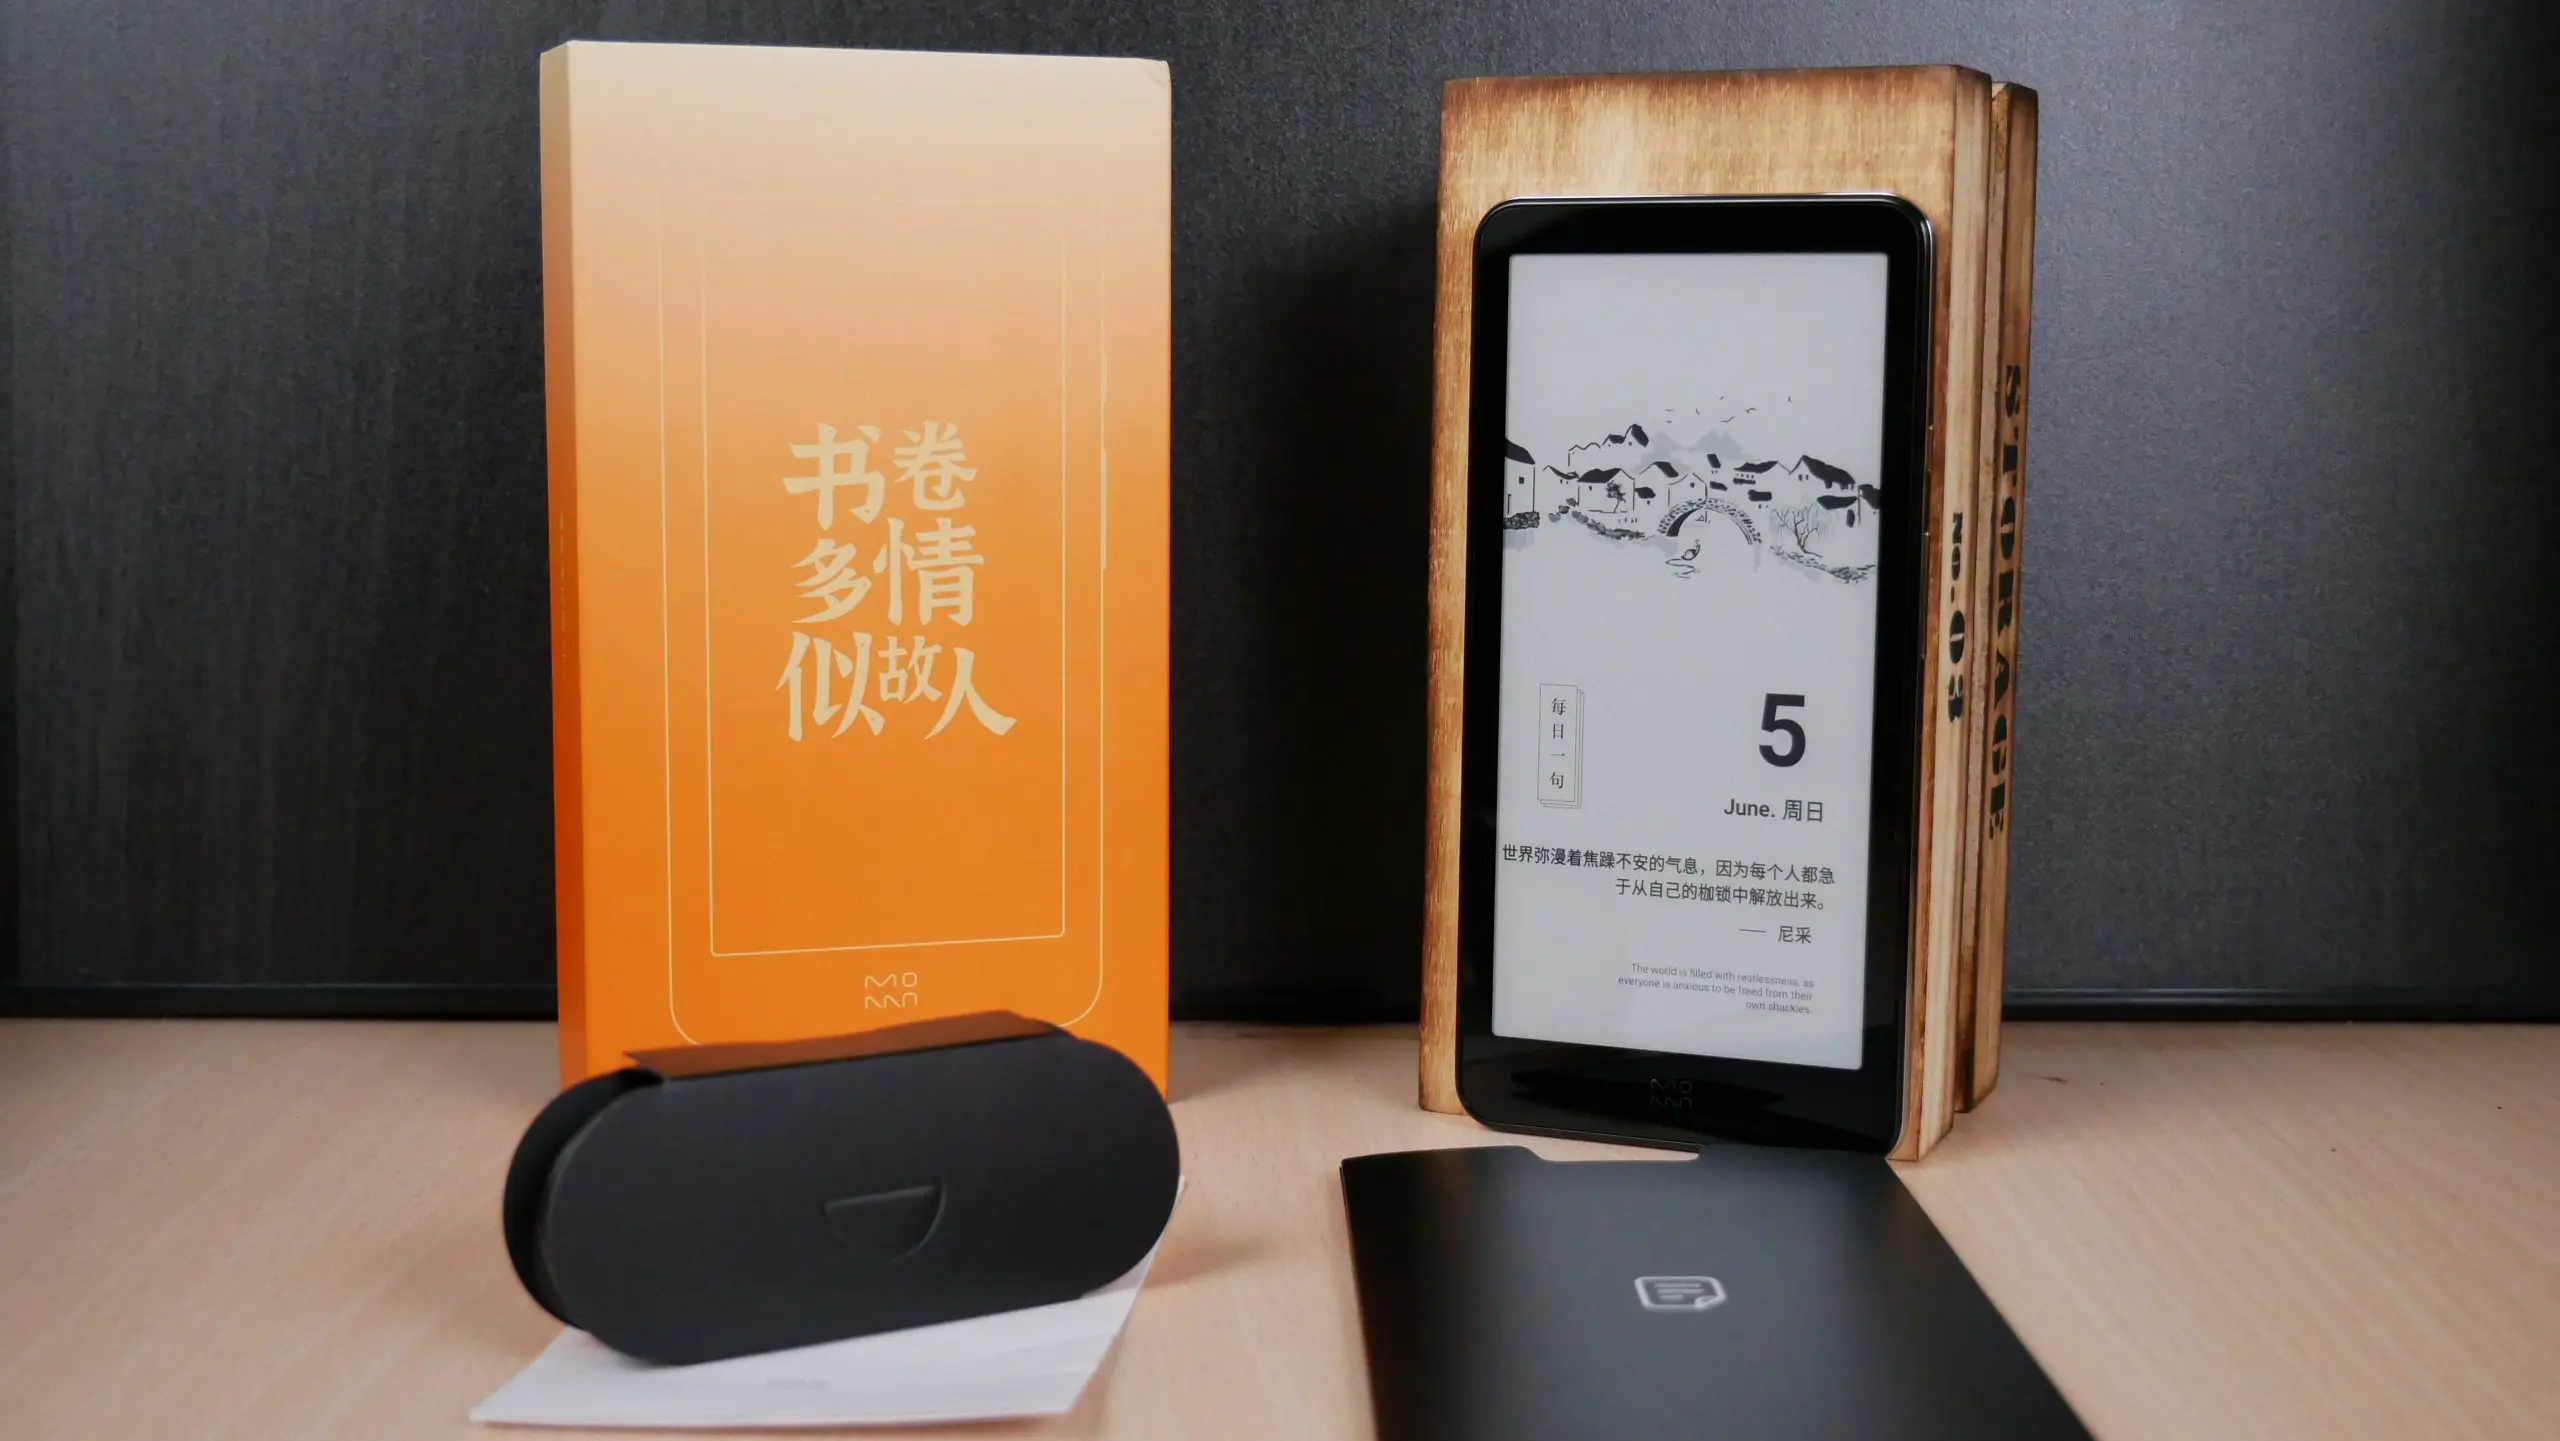 First look at the Xiaomi InkPalm Plus e-reader